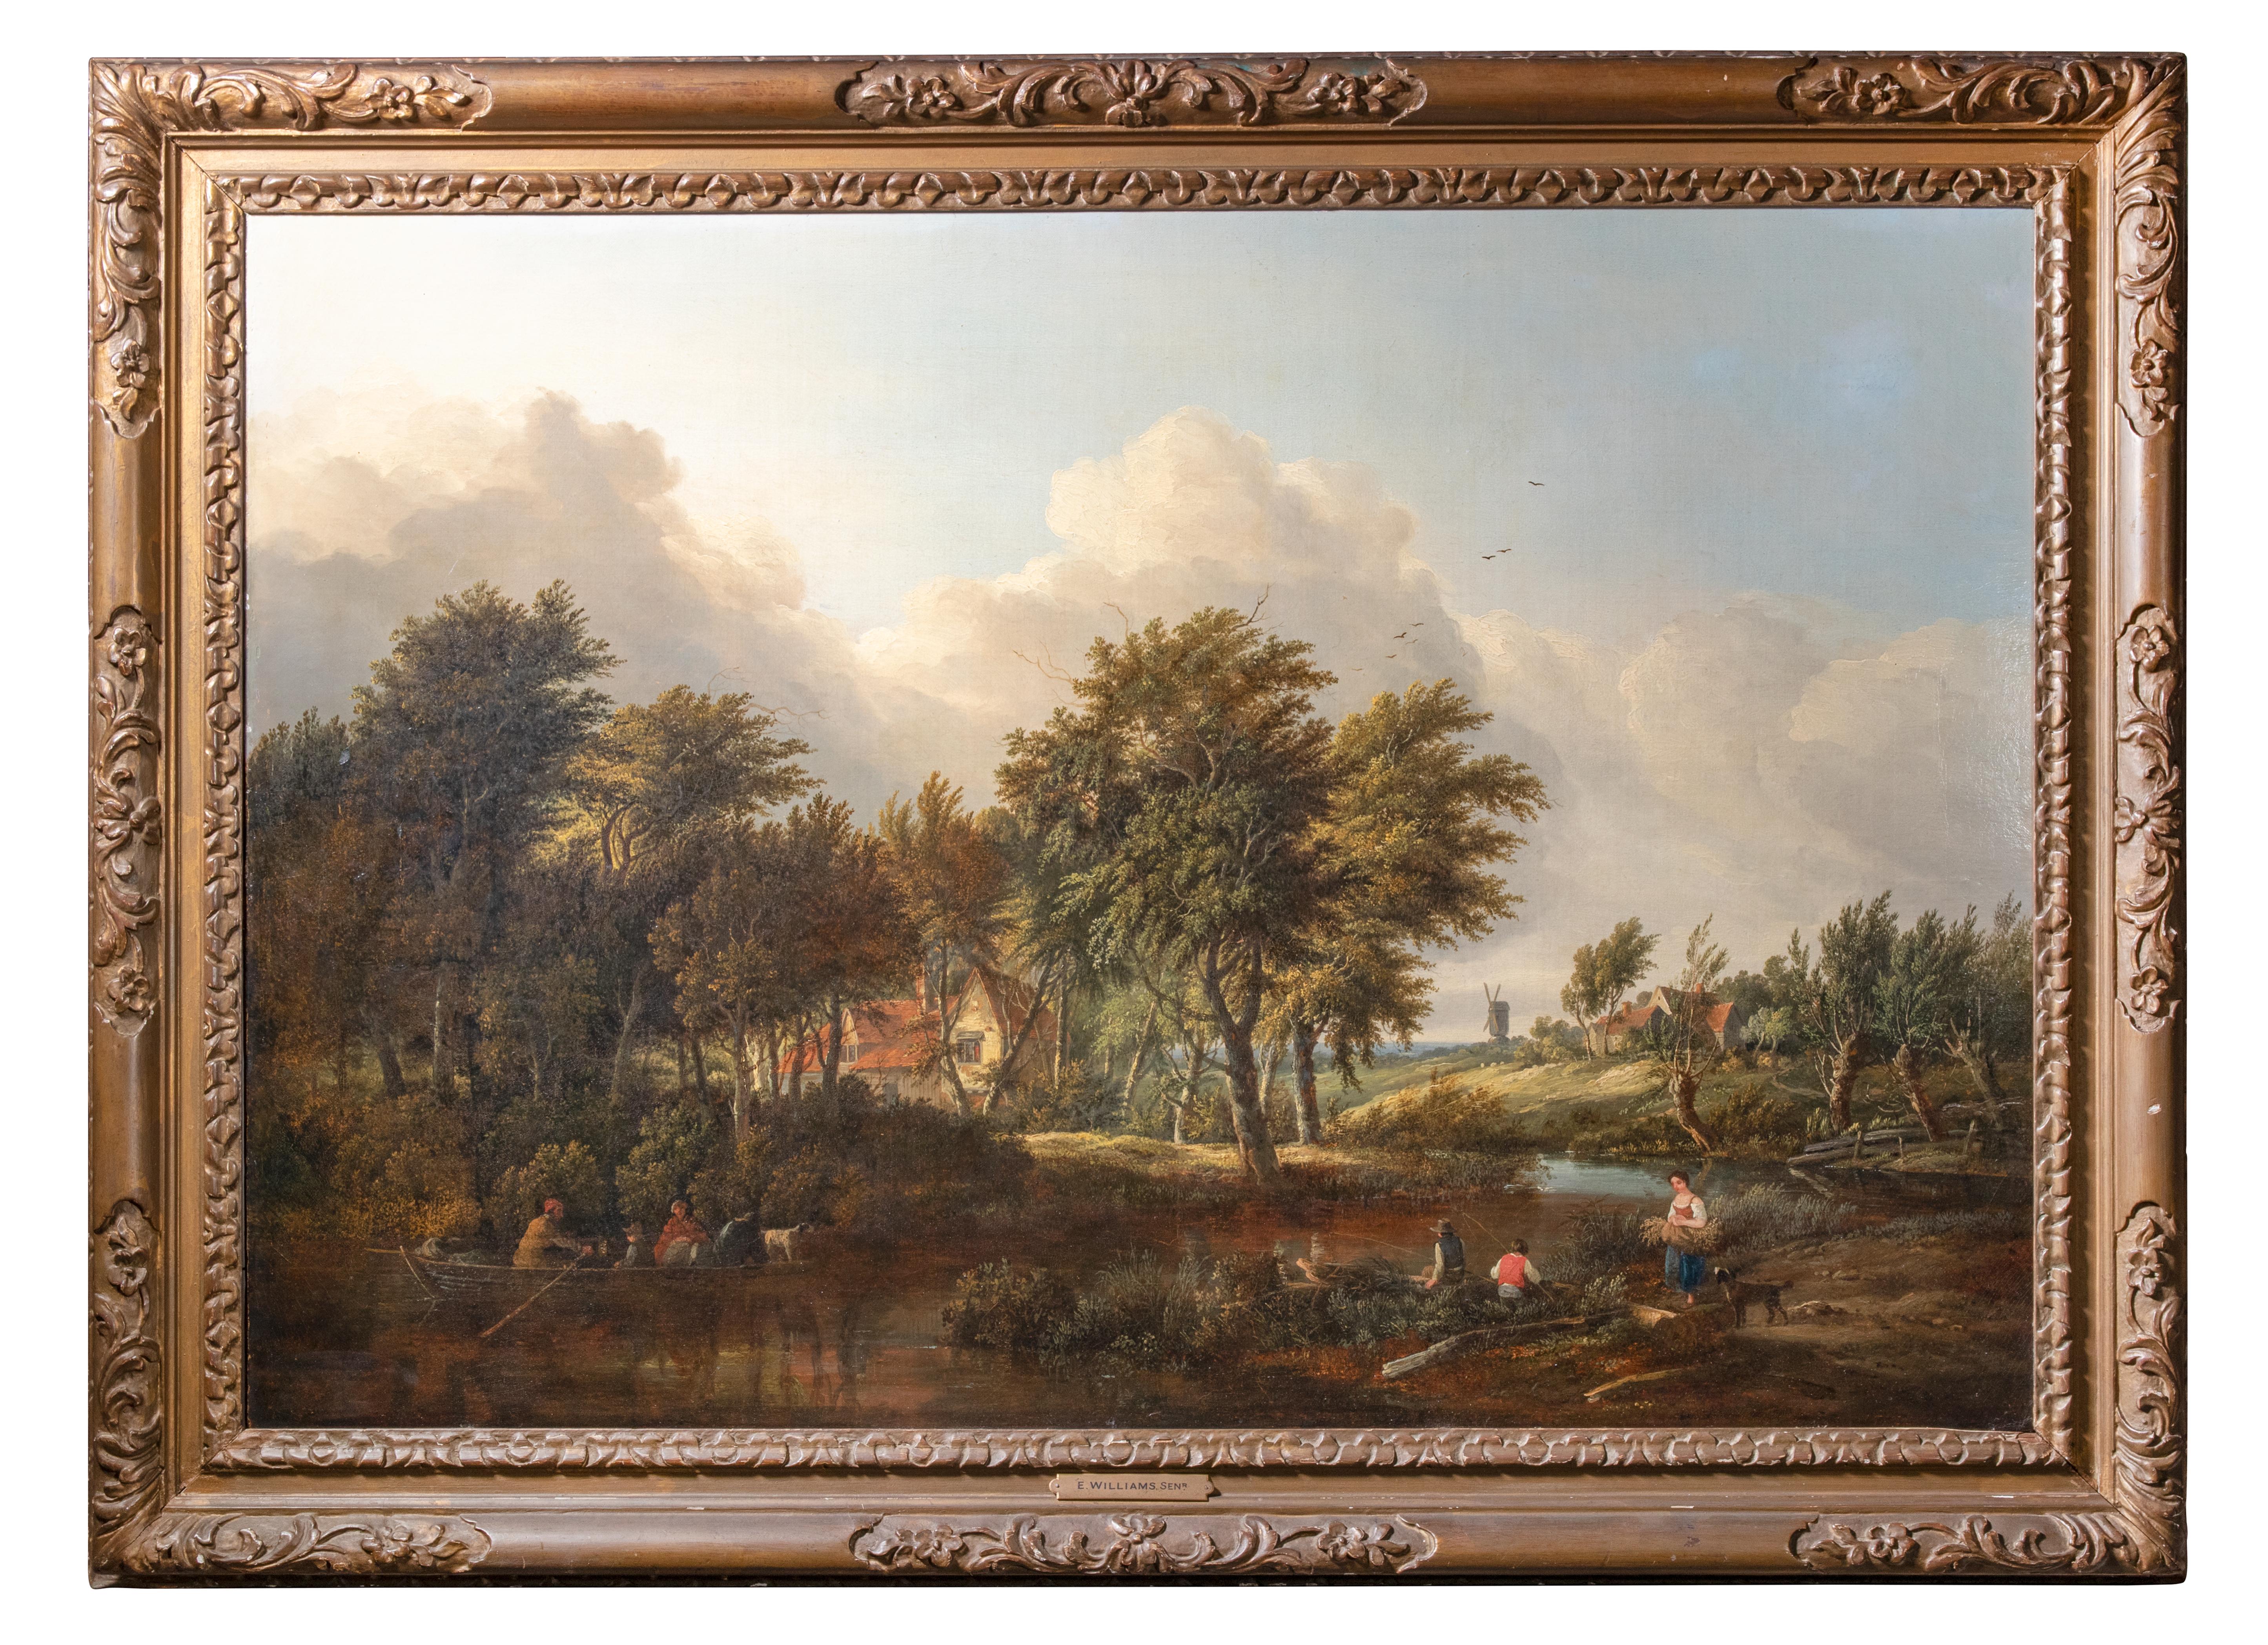 Landscape with Stream - Oil on Canvas - 18th Century